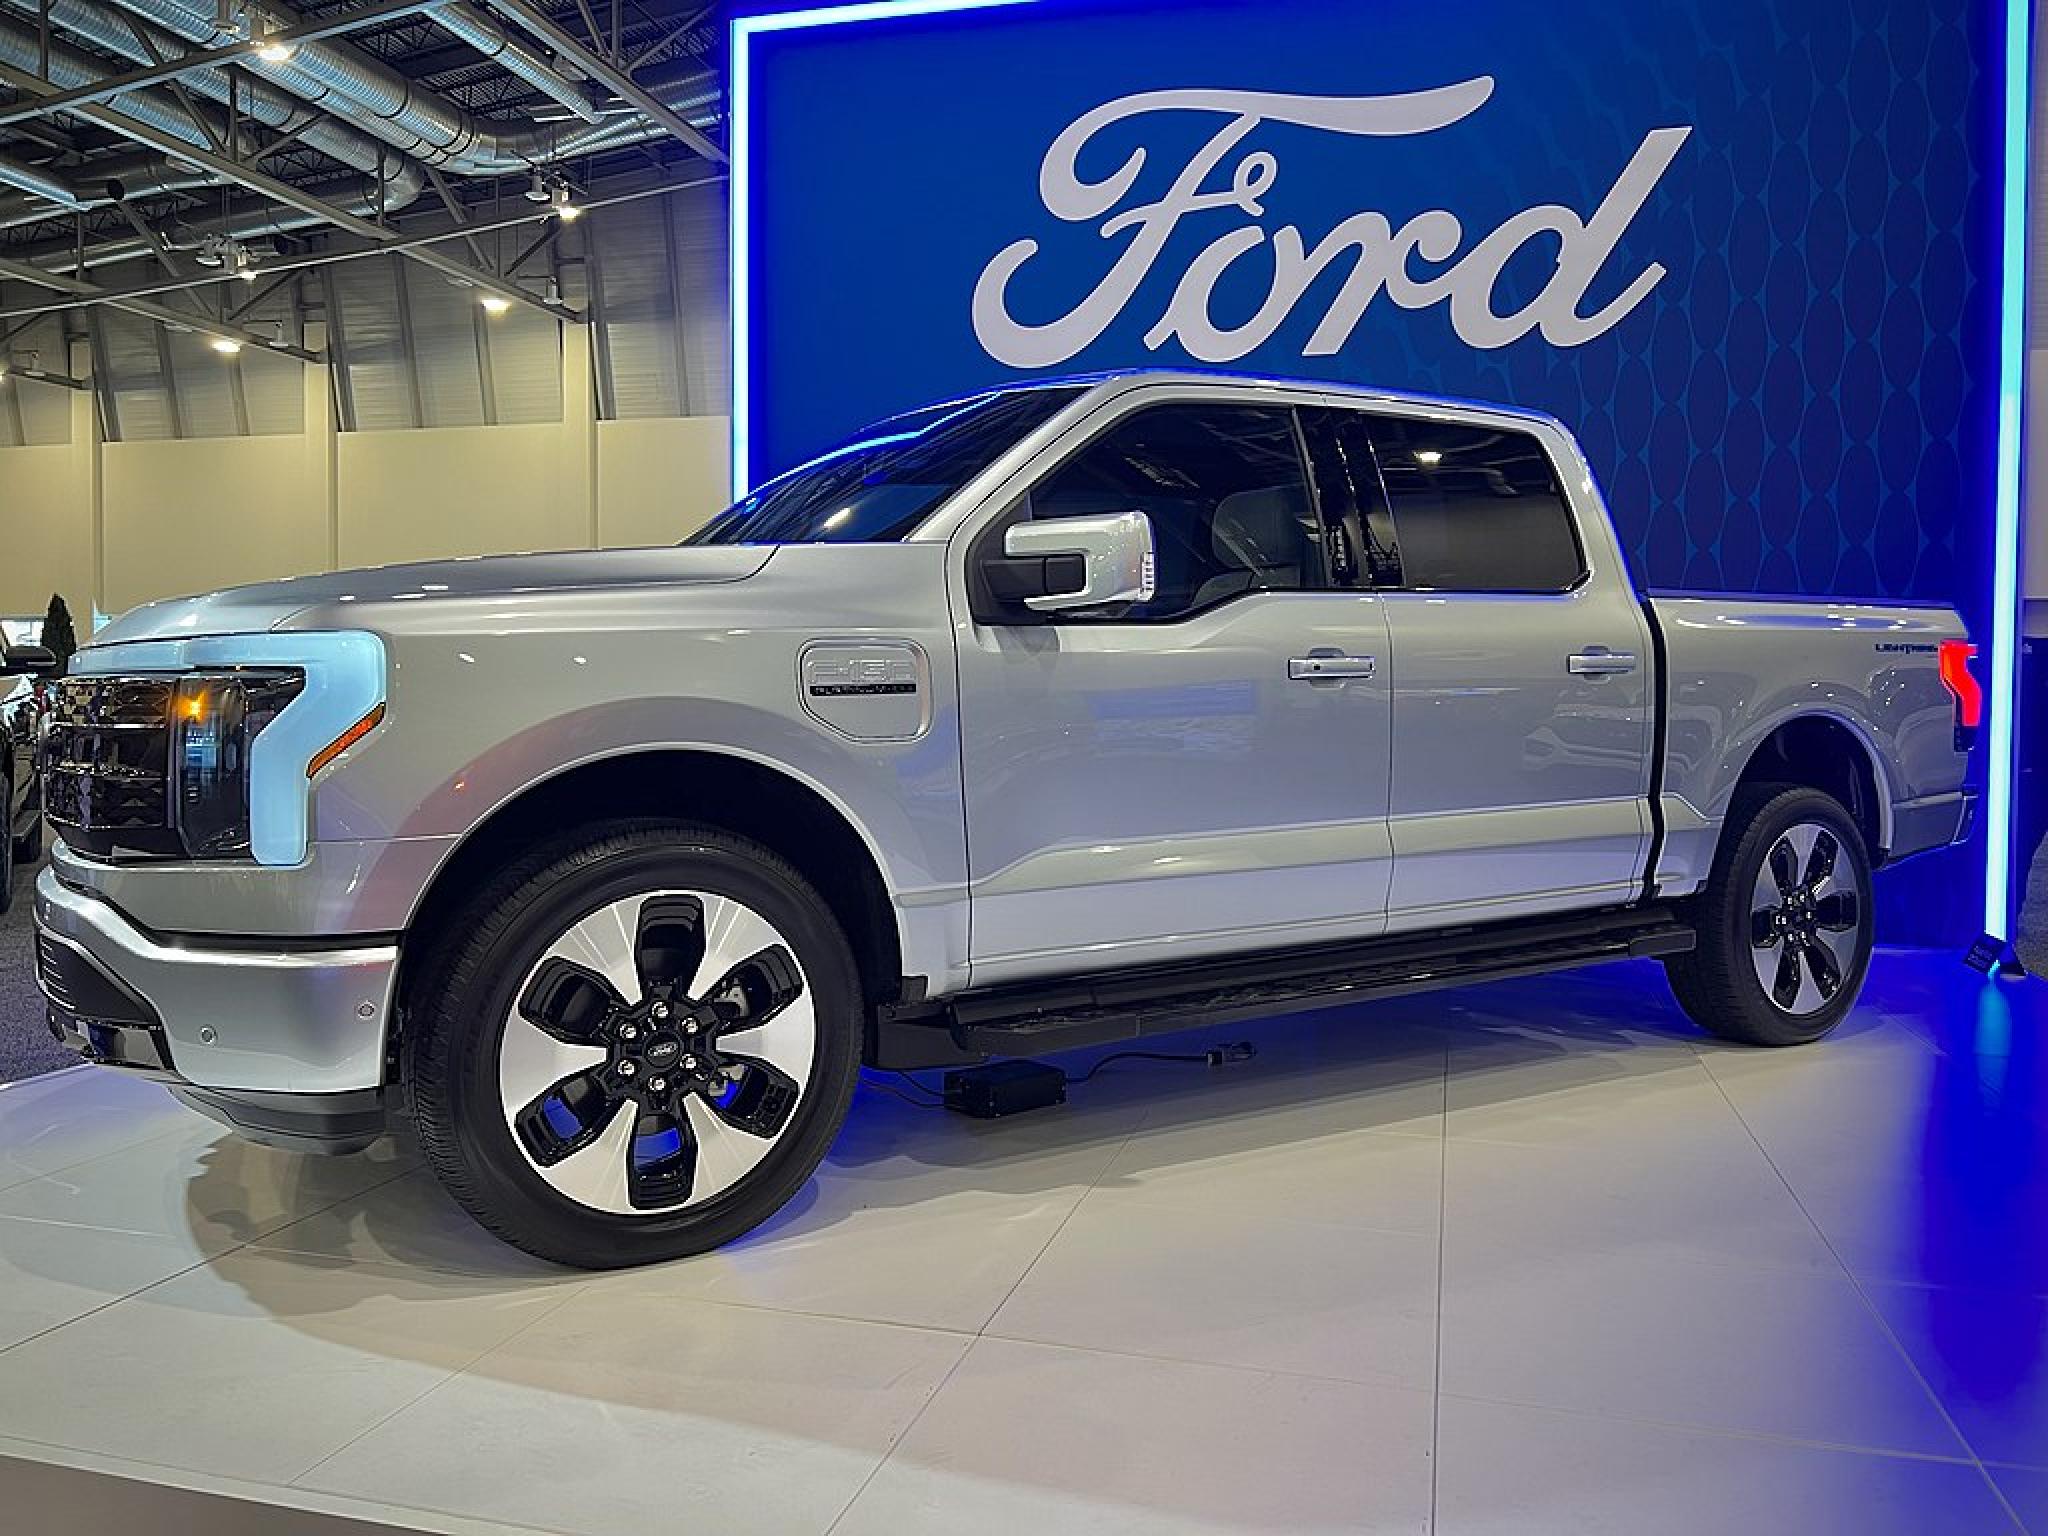  ford-motor-cuts-prices-for-f-150-lightning-truck-microsoft-sony-sign-agreement-for-call-of-duty-alibaba-stock-slips-on-chinas-q2-gdp-sentiment-todays-top-stories 